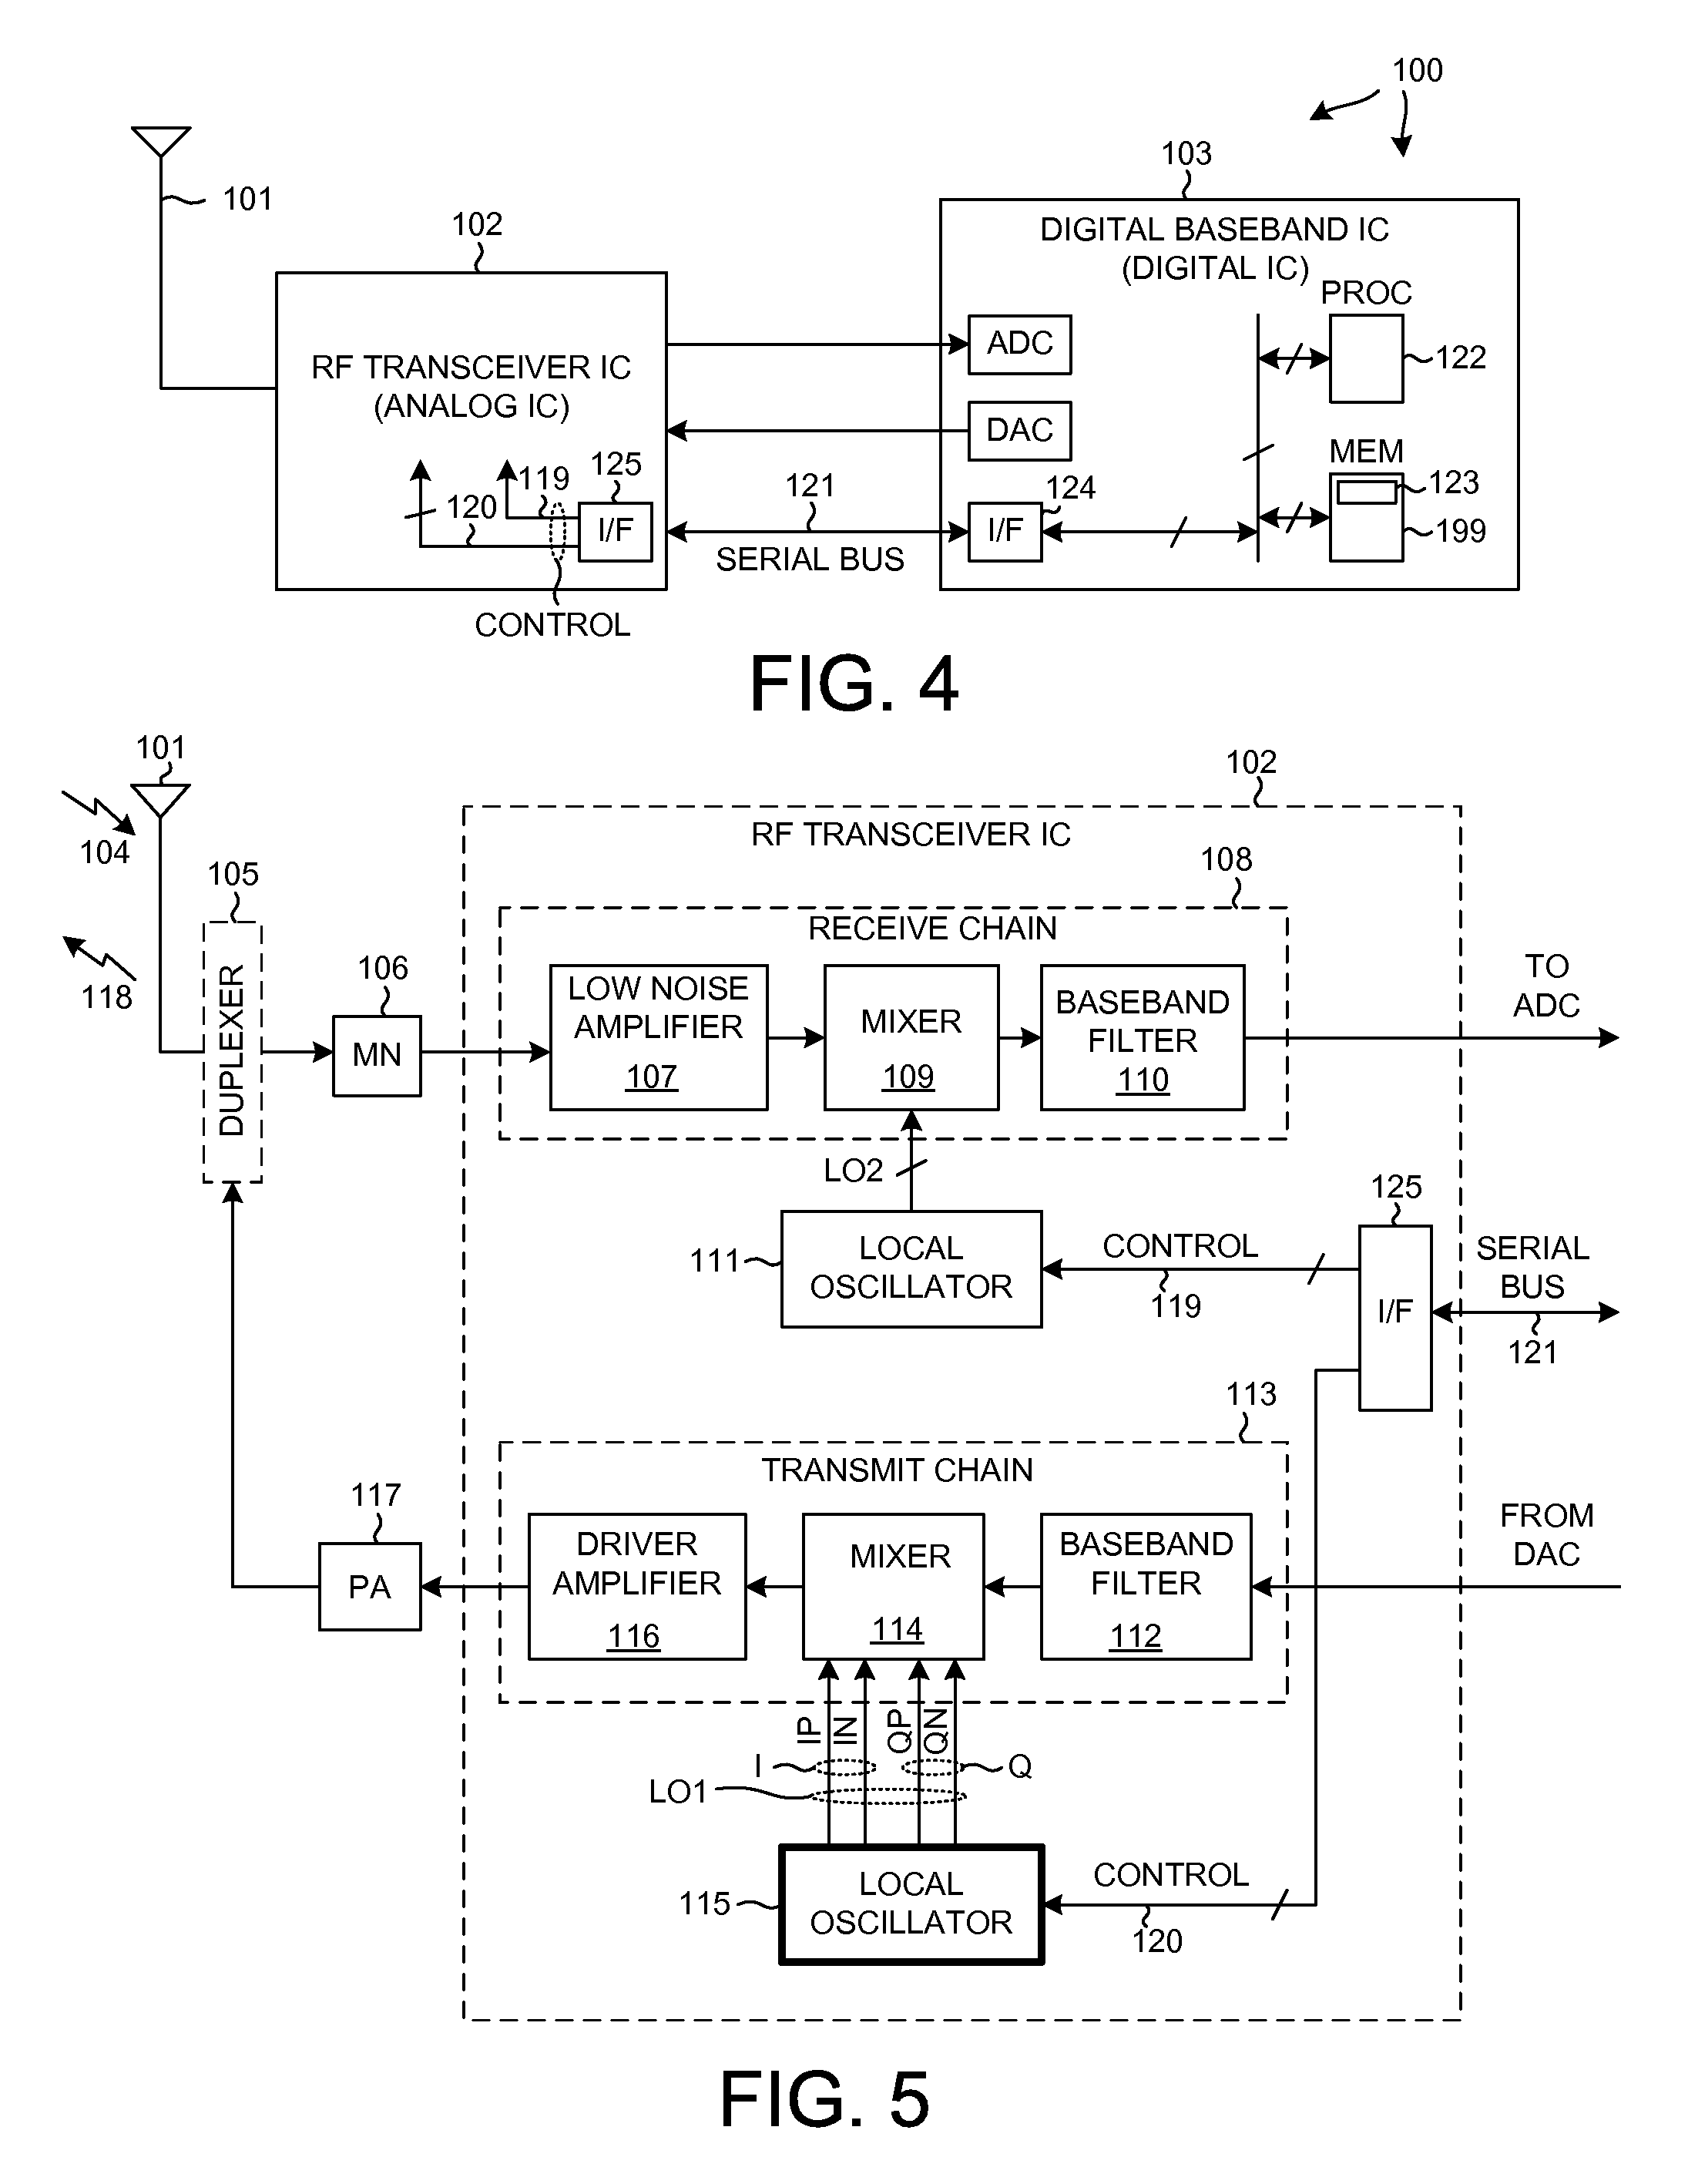 Driving a mixer with a differential lo signal having at least three signal levels